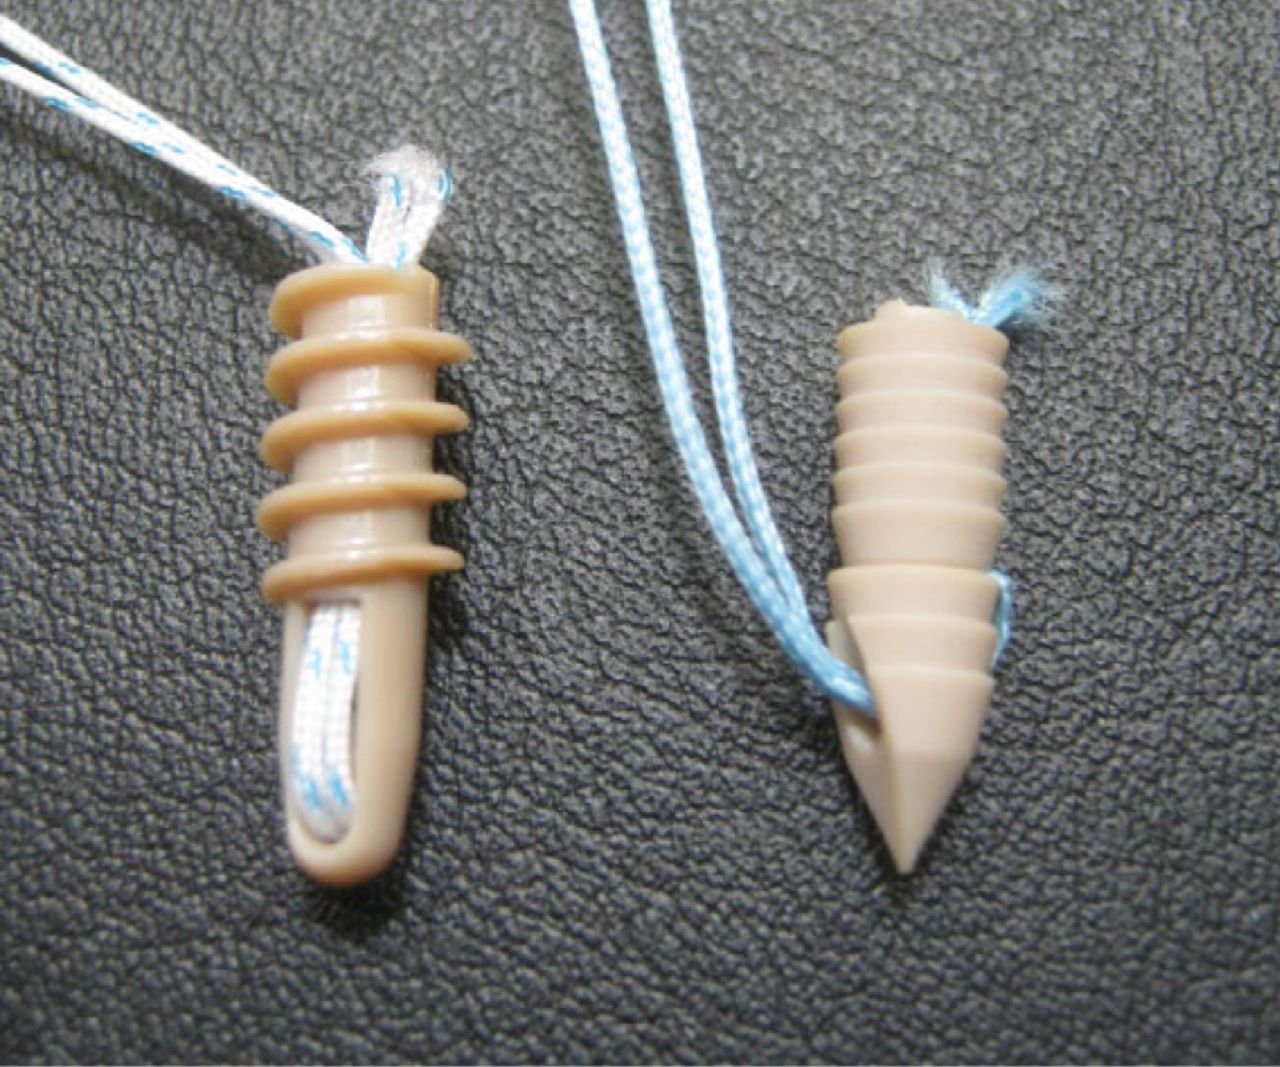 Fig. 1 
          Two major designs of knotless suture anchors according to the way the sutures are handled with respect to the anchor body: (left) internal knotless suture anchor (e.g. SpeedScrew anchor), (right) external knotless suture anchor (e.g. MultiFIX P anchor).
        